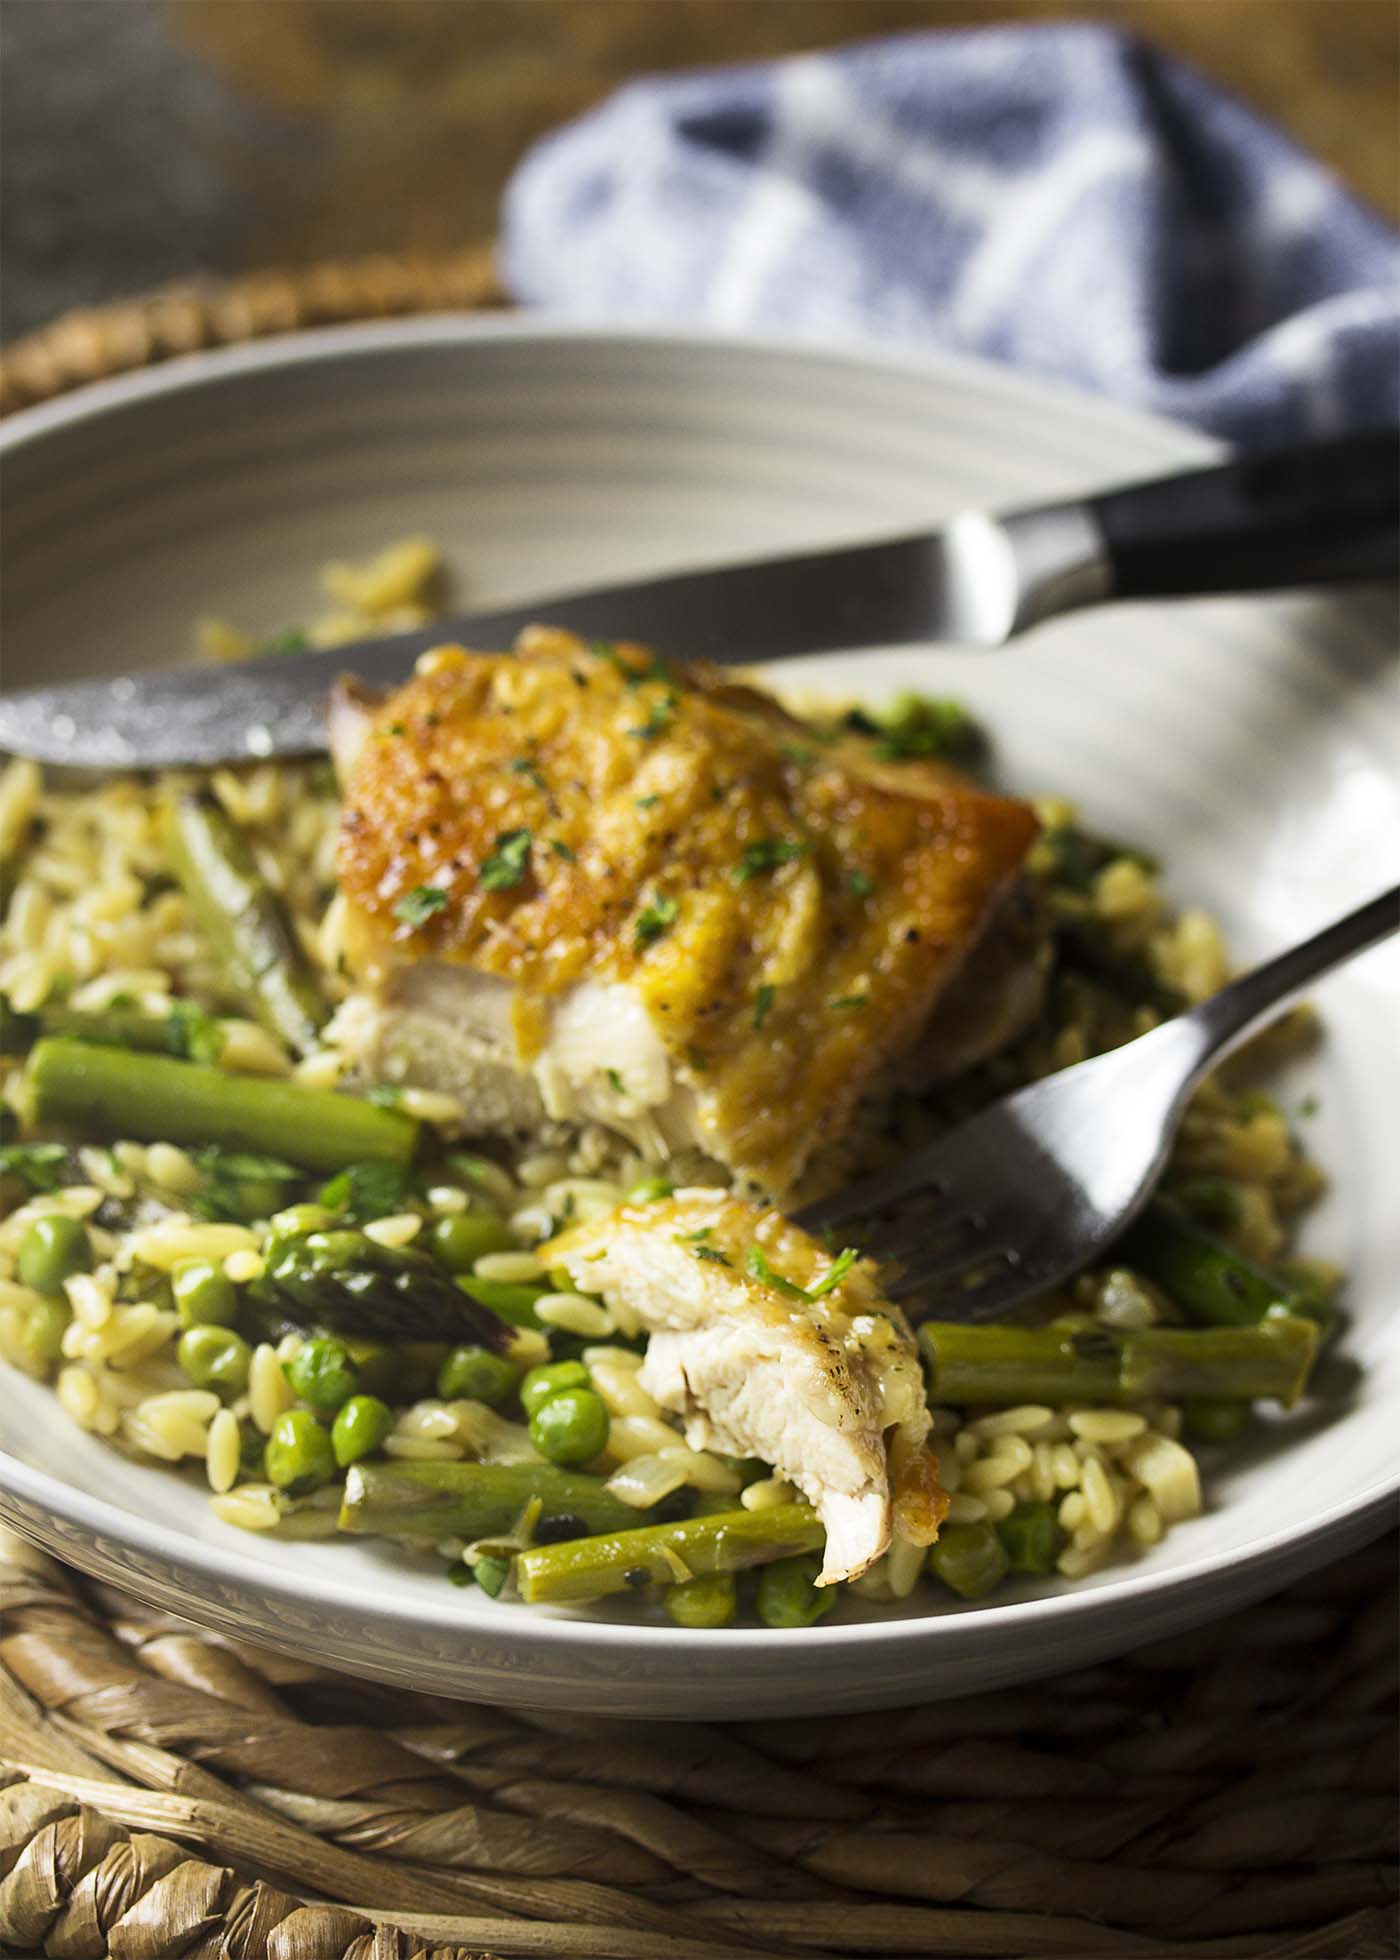 Chicken, orzo, and vegetables in a bowl with thigh cut open and a piece on a fork.